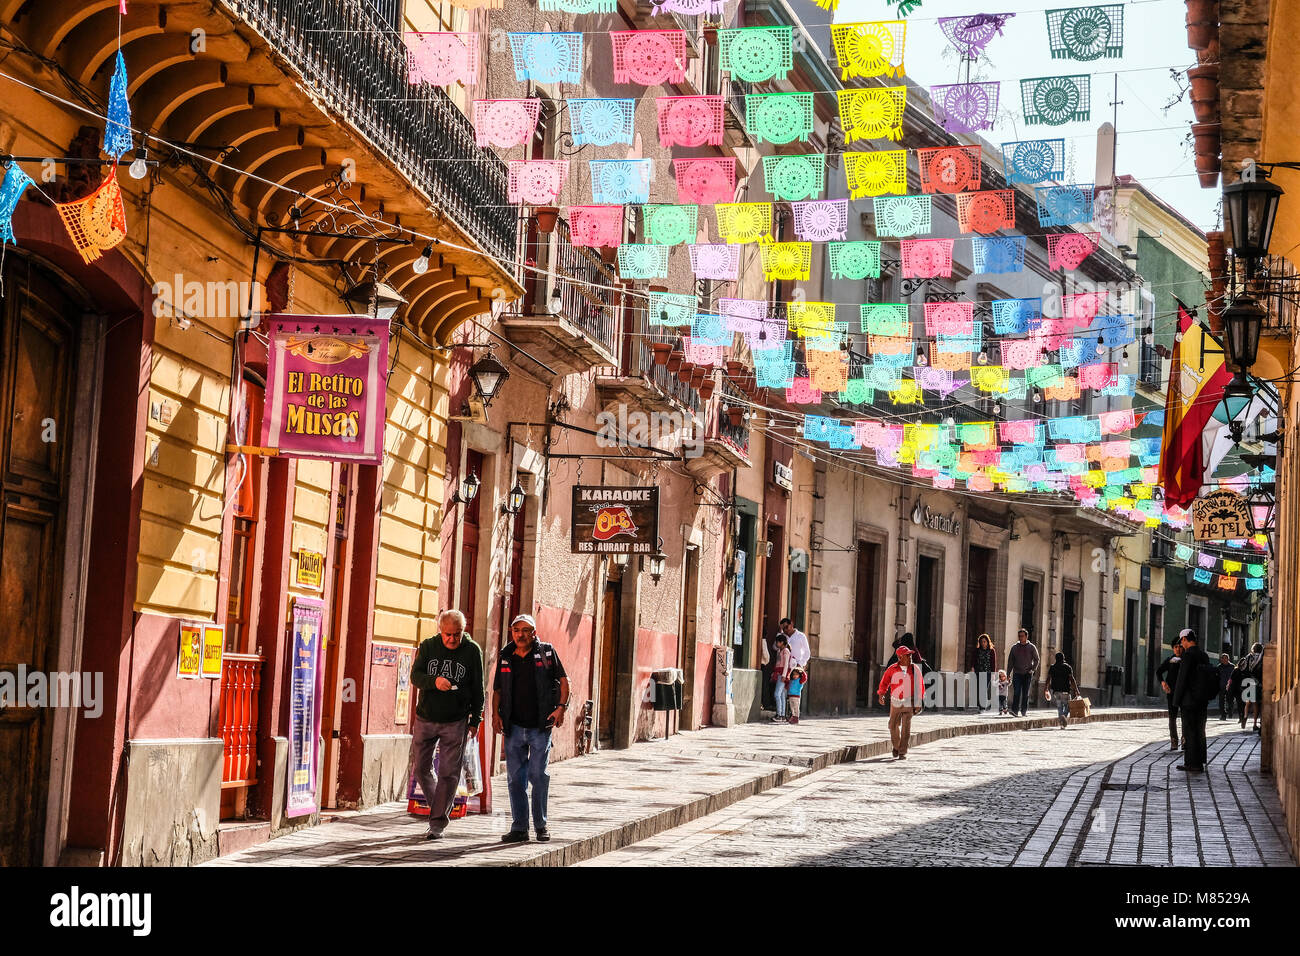 Mexicans walking on cobblestone street with sun lit colorful banner flags hanging above Stock Photo